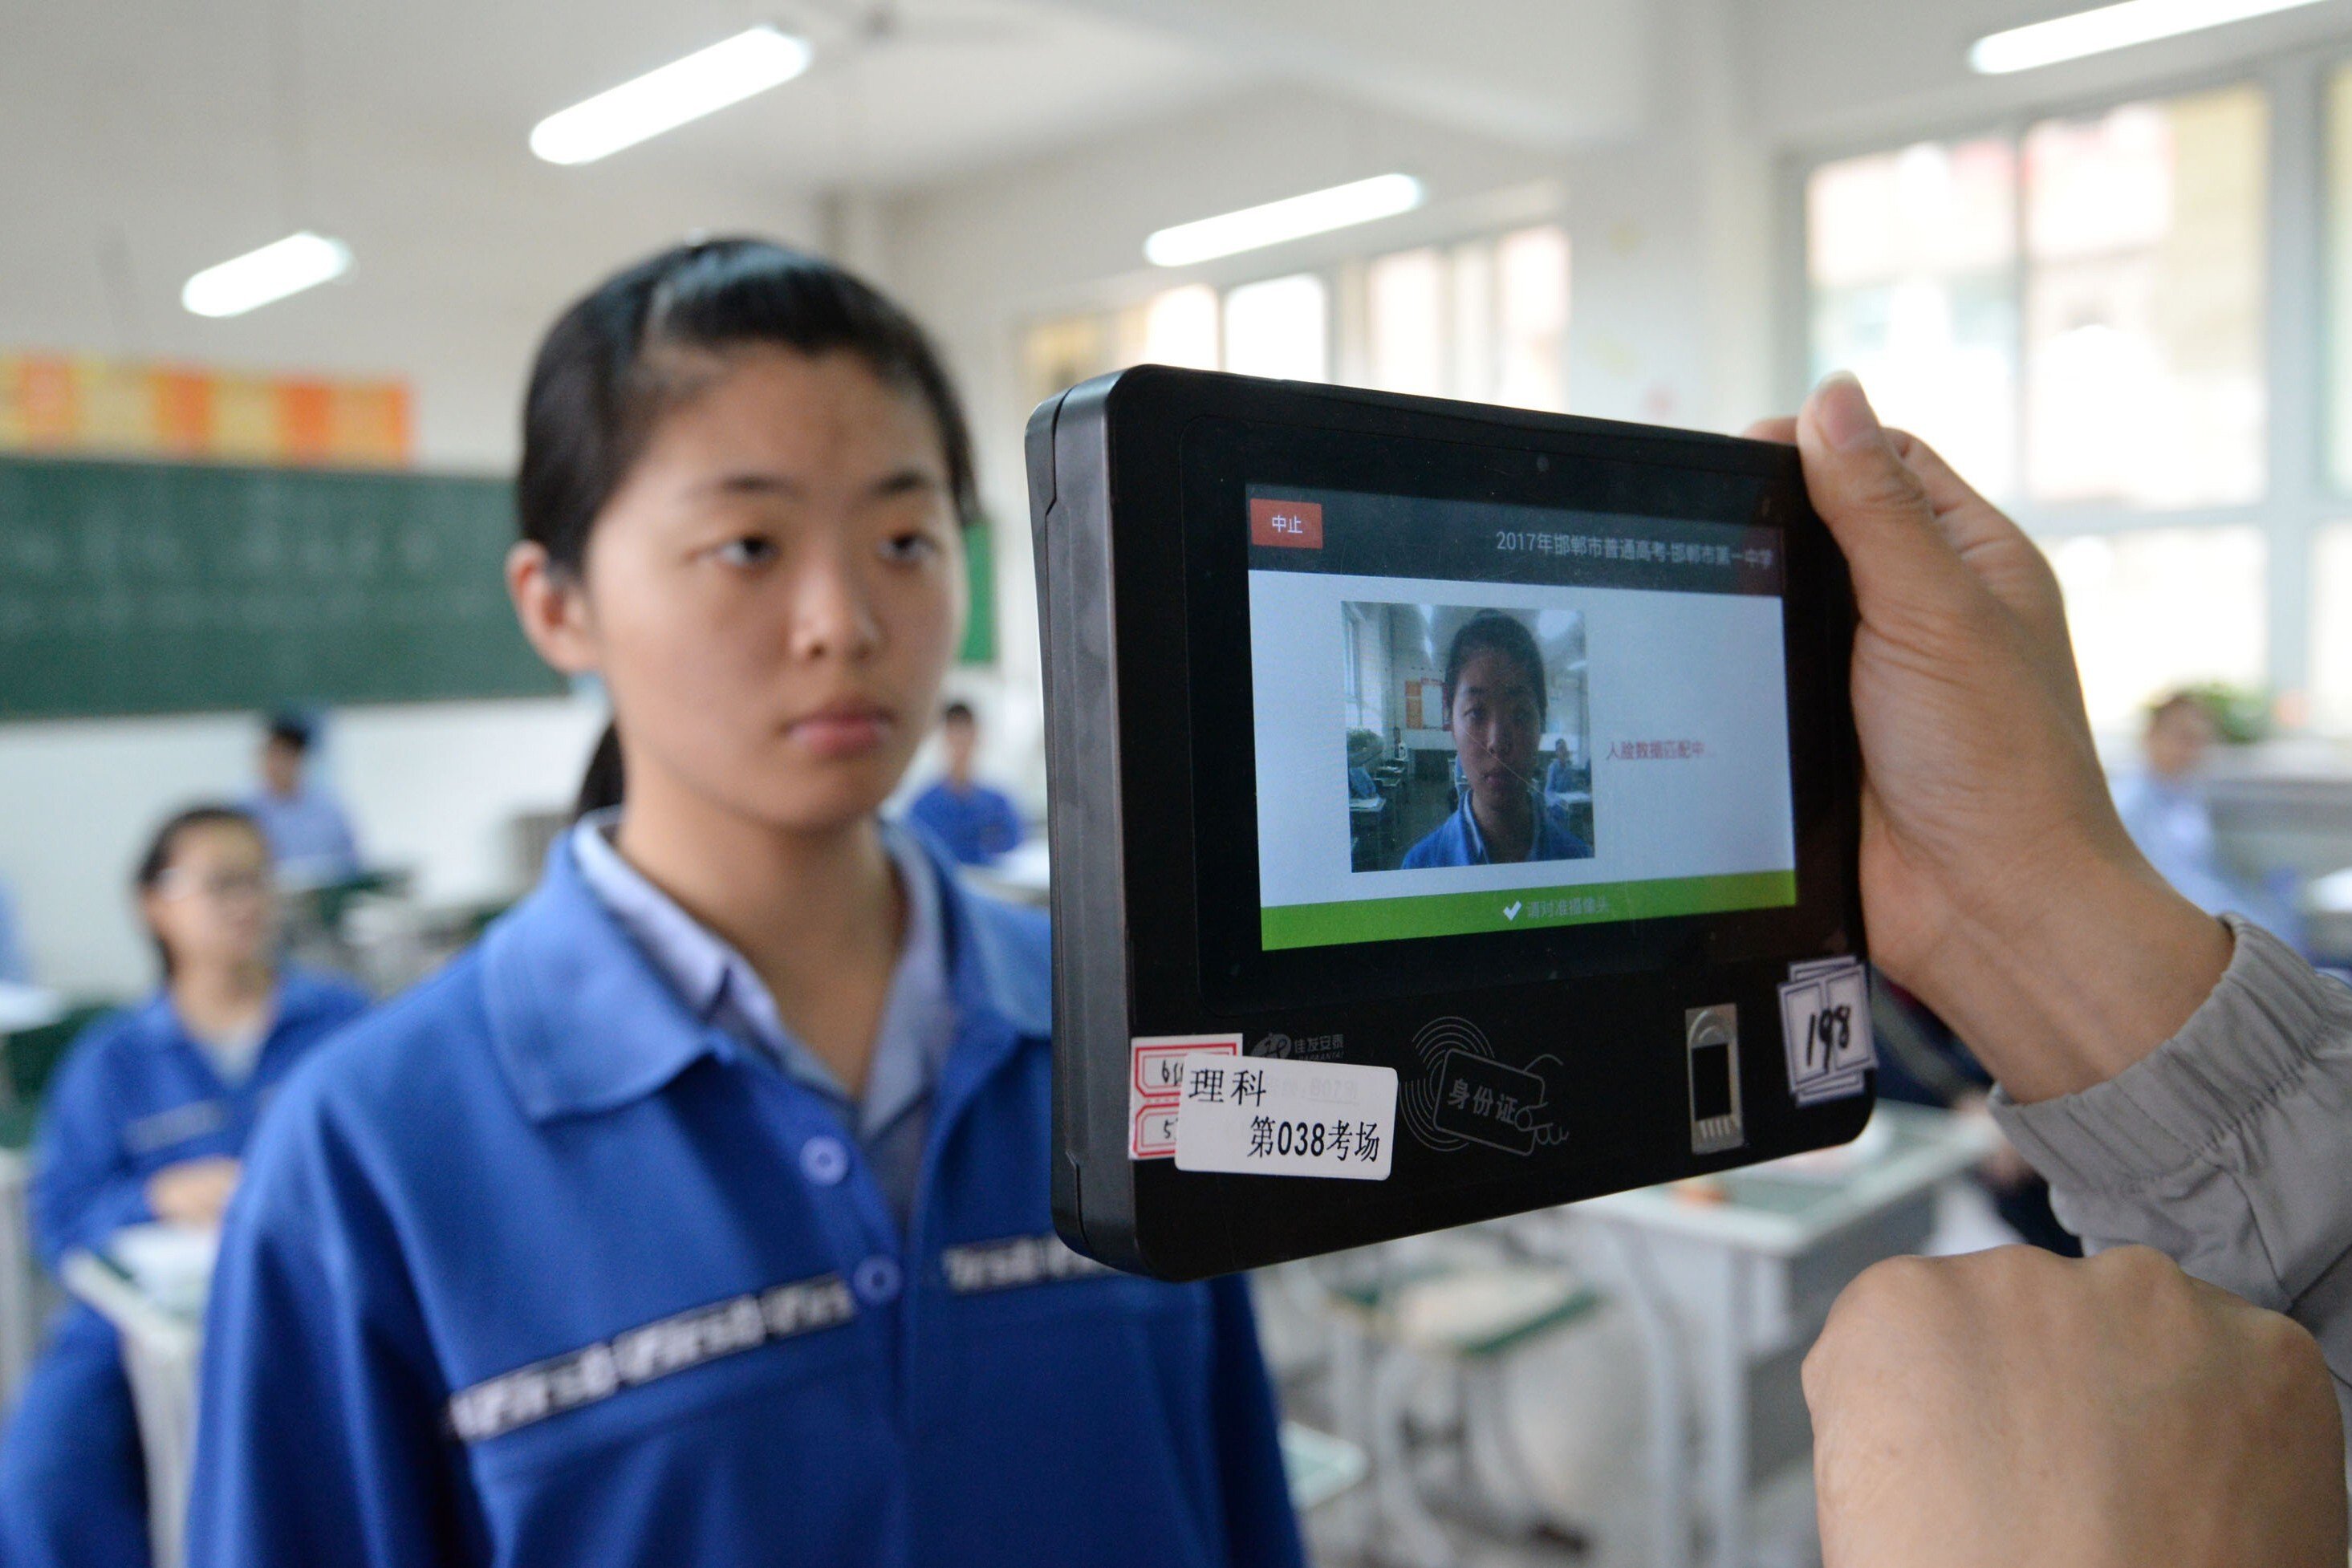 A teacher uses a machine which employs both fingerprint and facial recognition technology to check the identification of a student before a simulated college entrance exam in Handan in China‘s northern Hebei province on June 6, 2017. Photo: STR/AFP via Getty